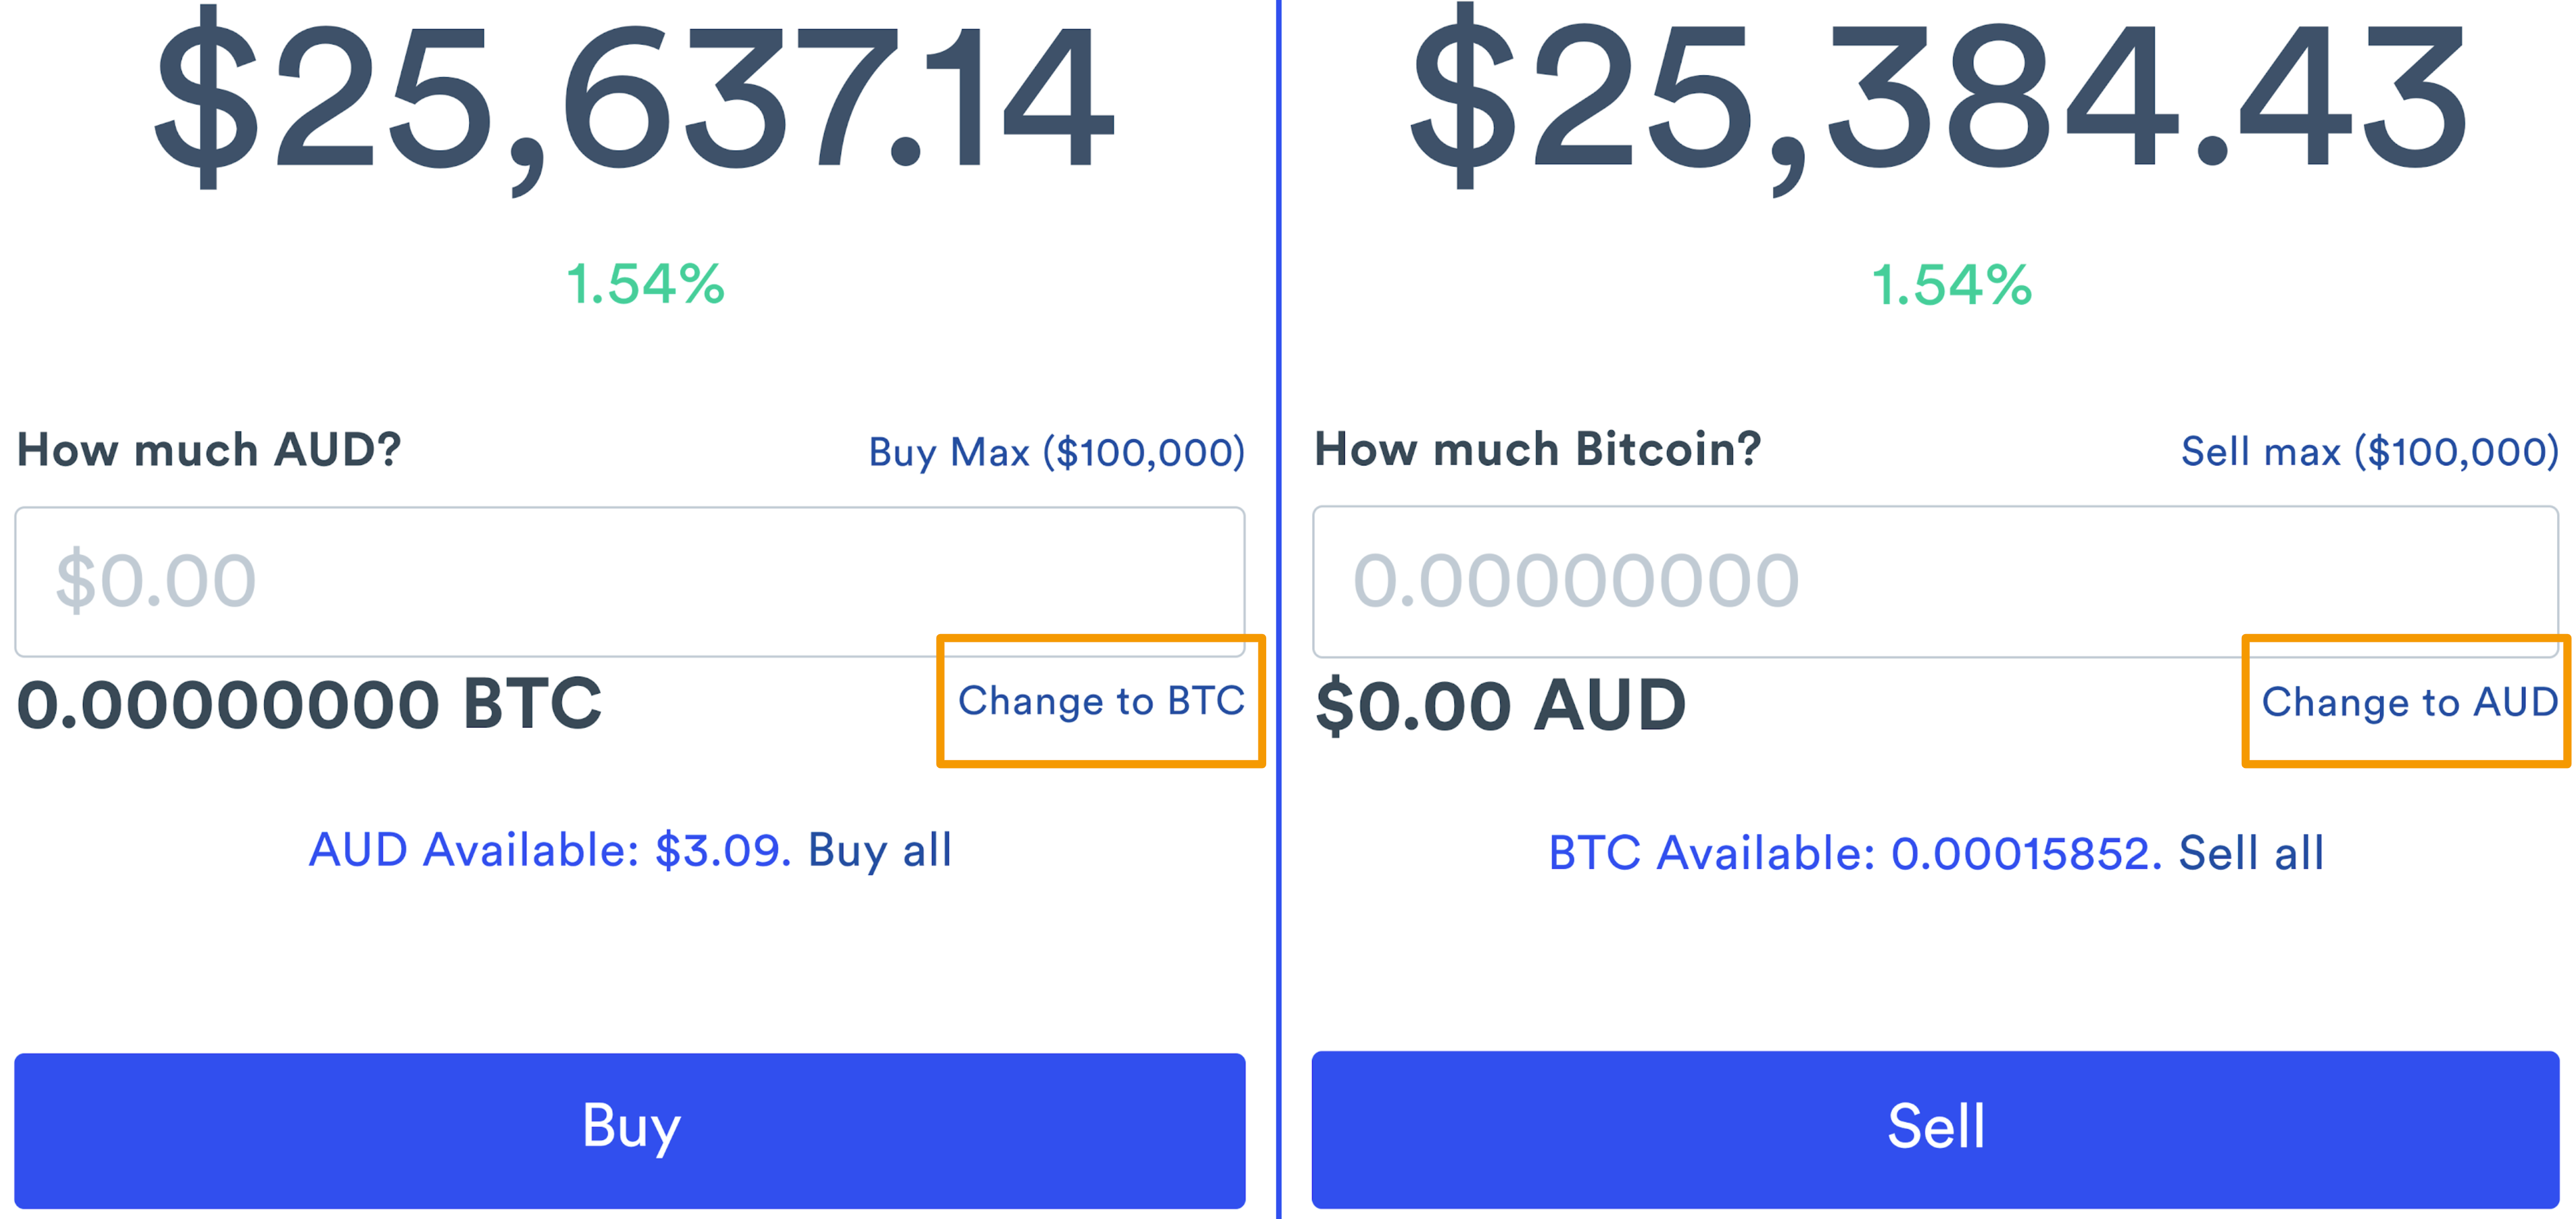 Change_to_BTC_or_AUD.png